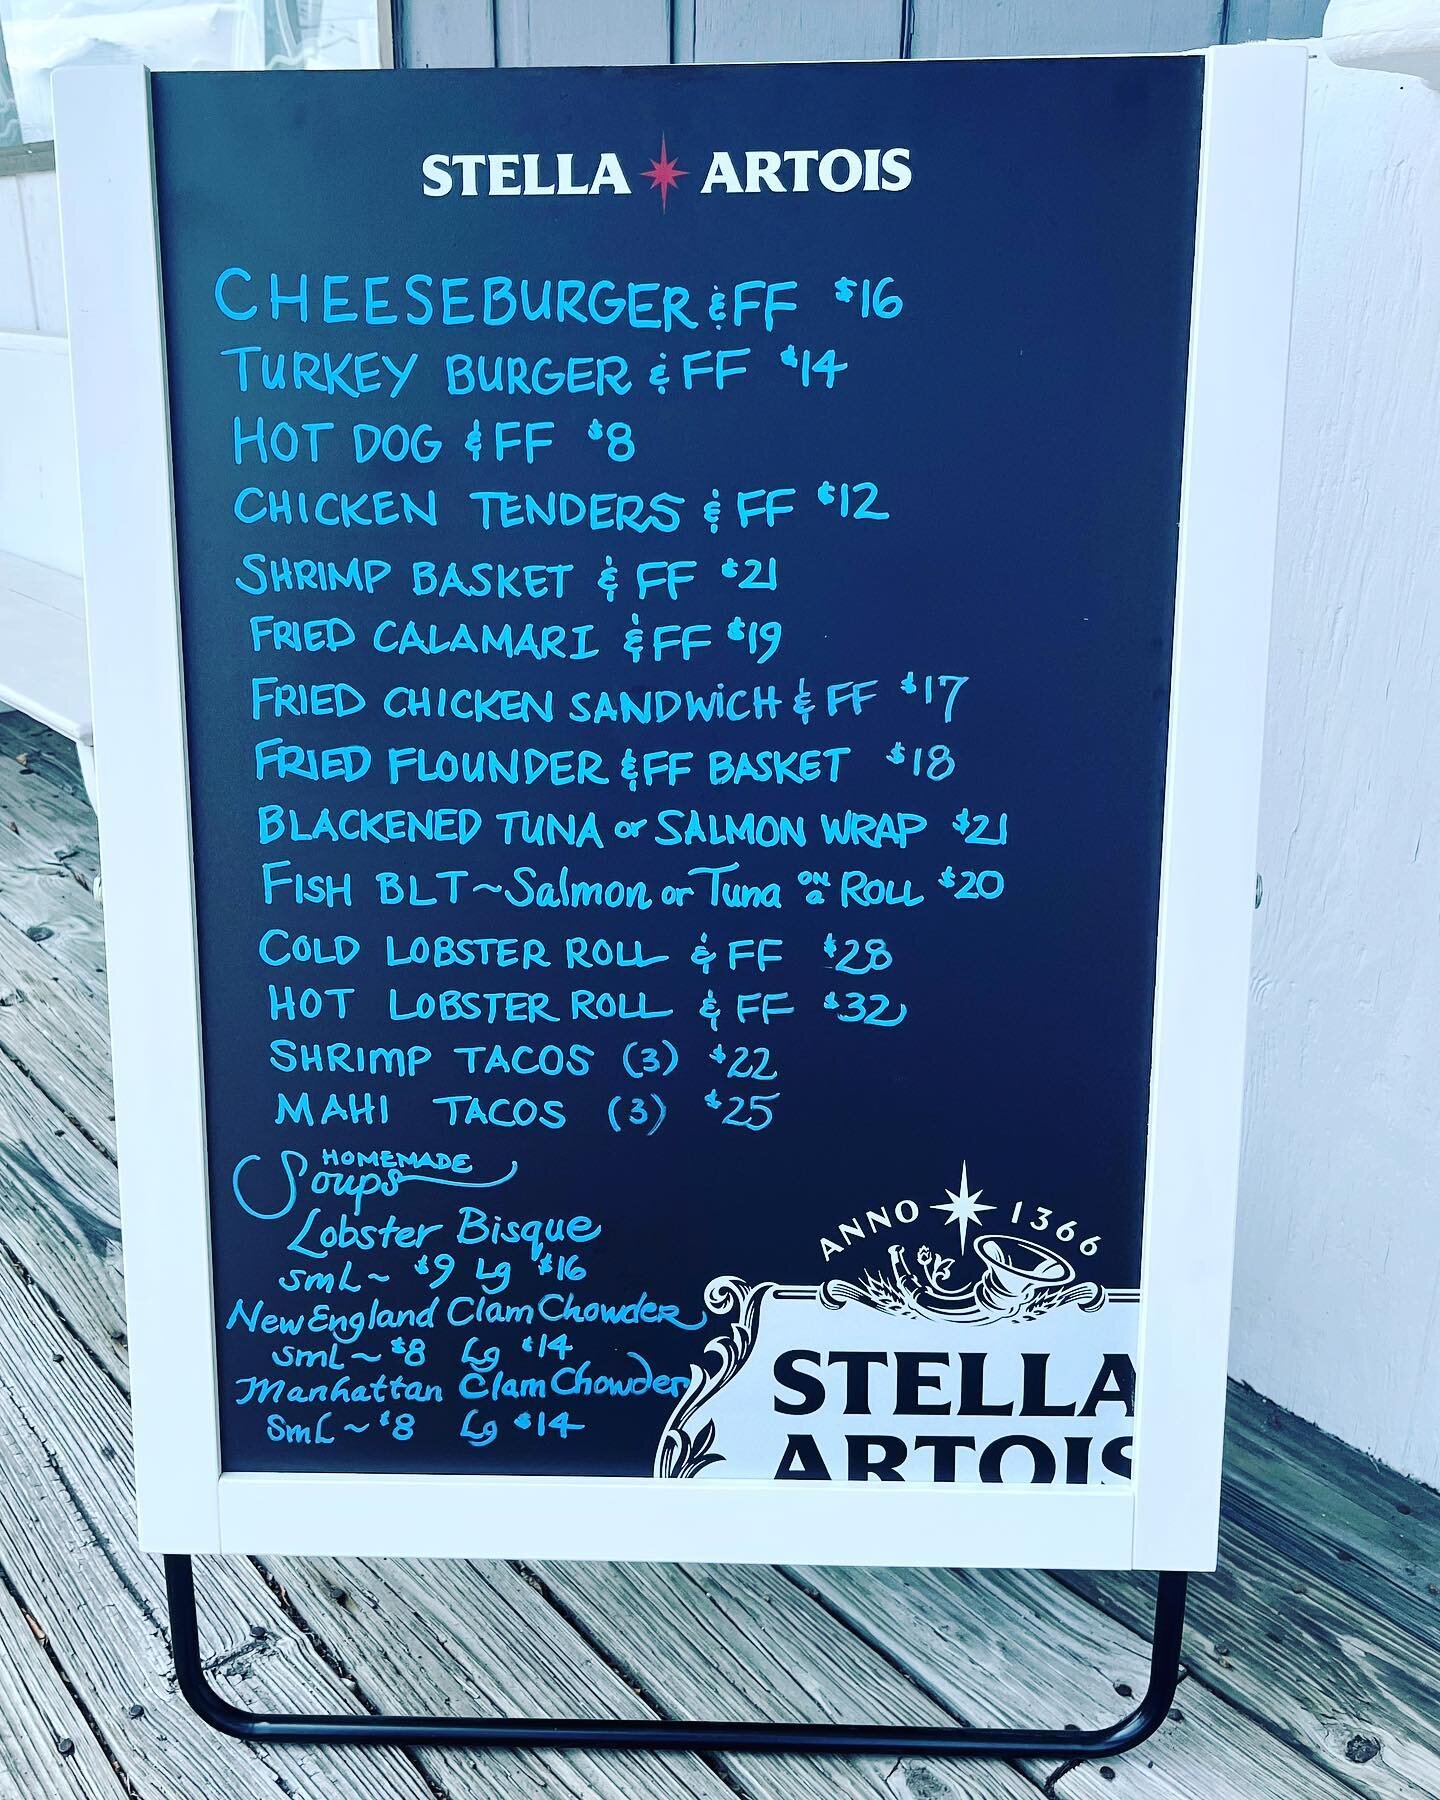 Our Snack Shop is now open for all of your take out needs! We are also serving Breakfast Sandwiches &amp; Hamptons Coffee ☕️☀️ 

Hours: 9:00am &mdash; 6:00pm ⌛️

#hamptonbays #hamptons #hamptonscoffee #beach #westhampton #eastend #snackshop #foodtogo